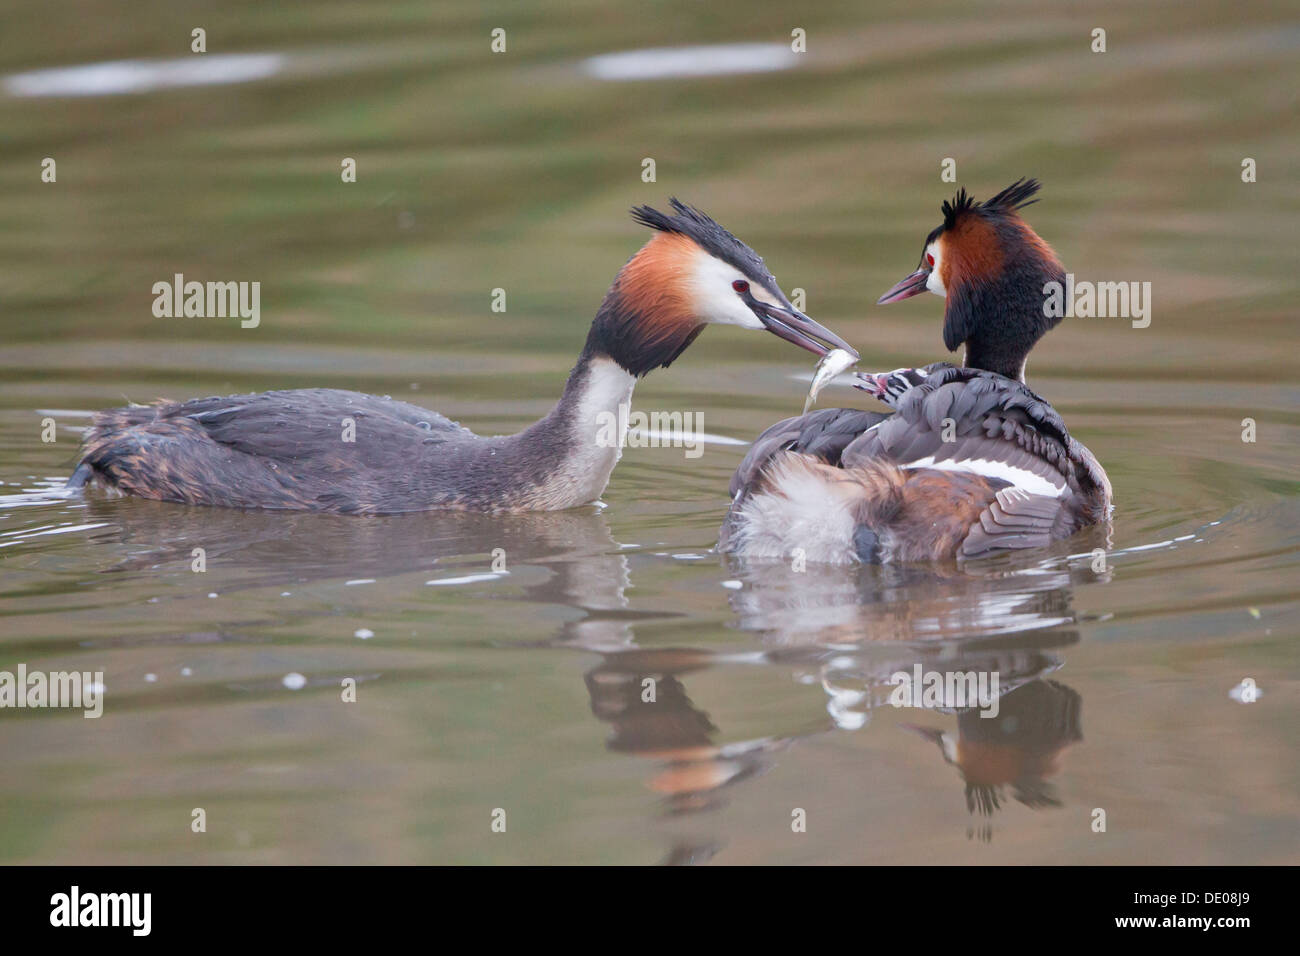 Great Crested Grebe (Podiceps cristatus), family, feeding chick in plumage Stock Photo